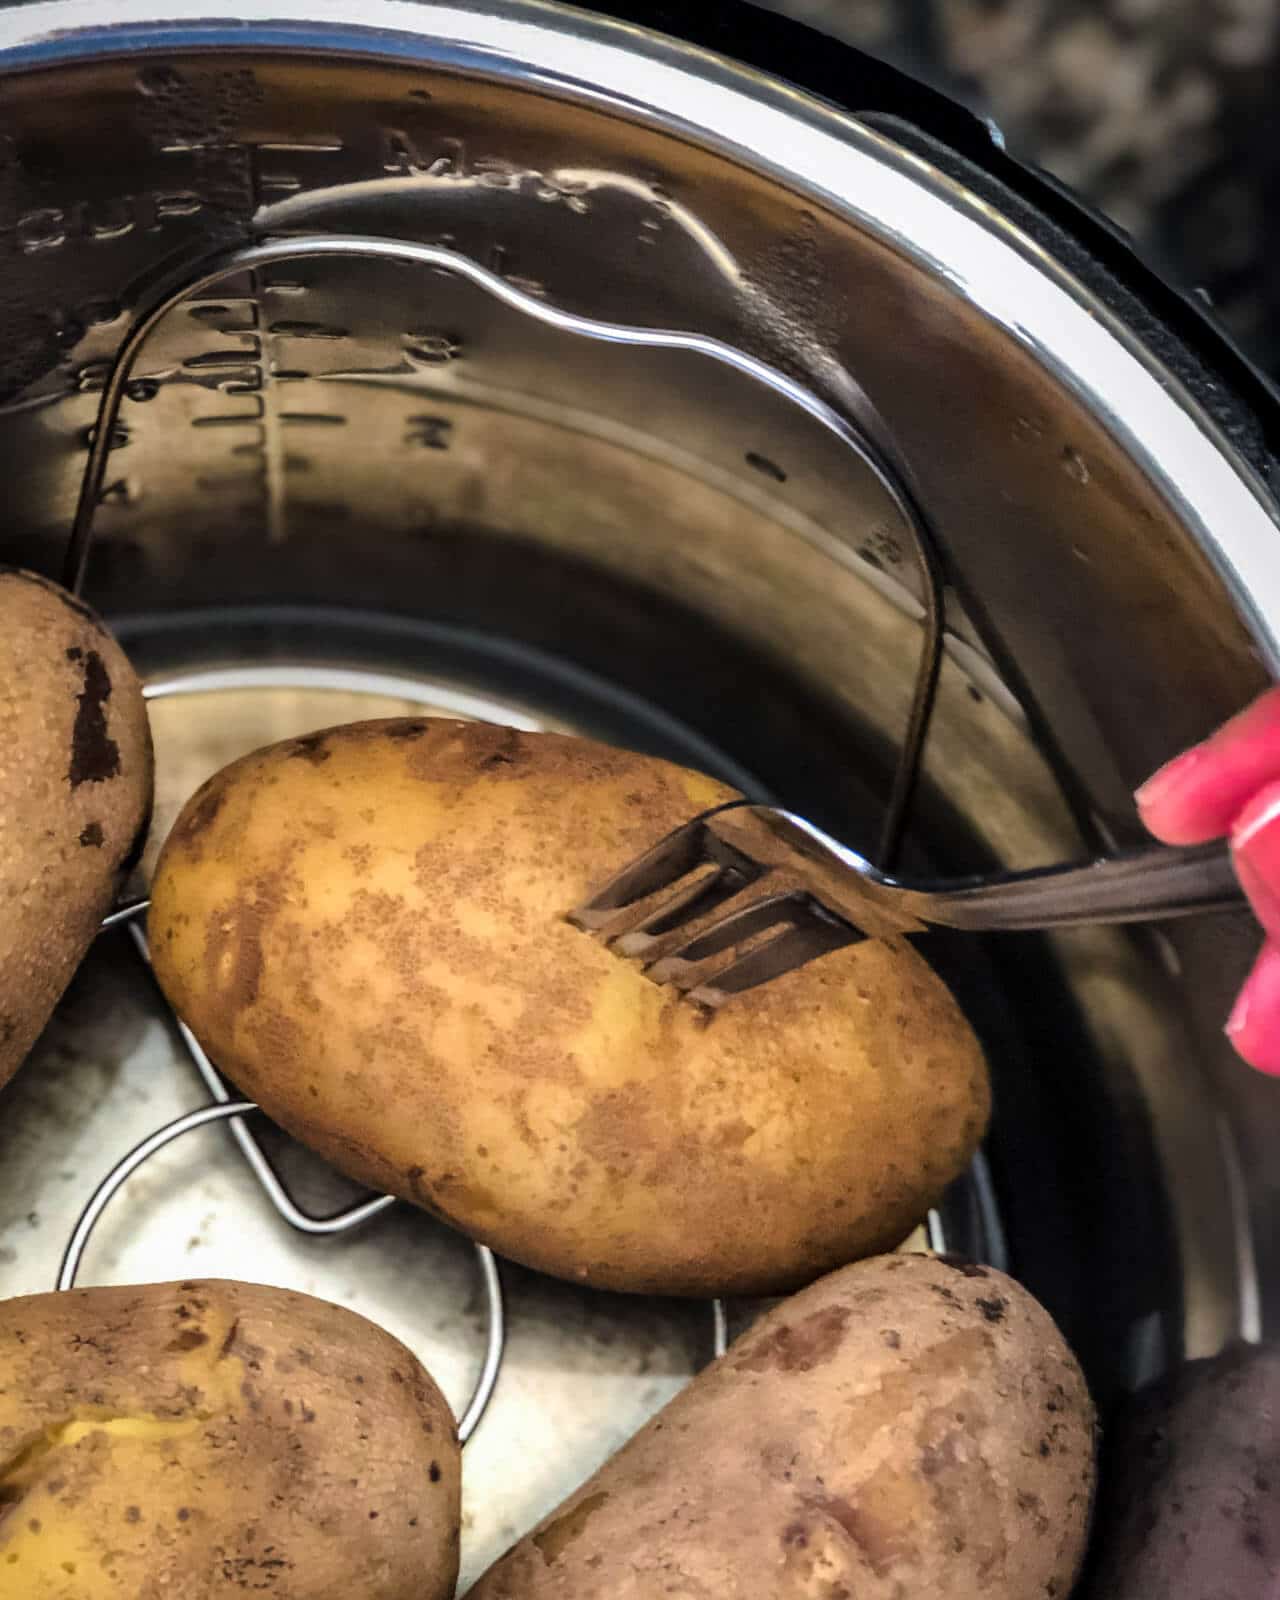 Potatoes in an instant pot after cooking with a fork poking into one of the potatoes to check if it is done.